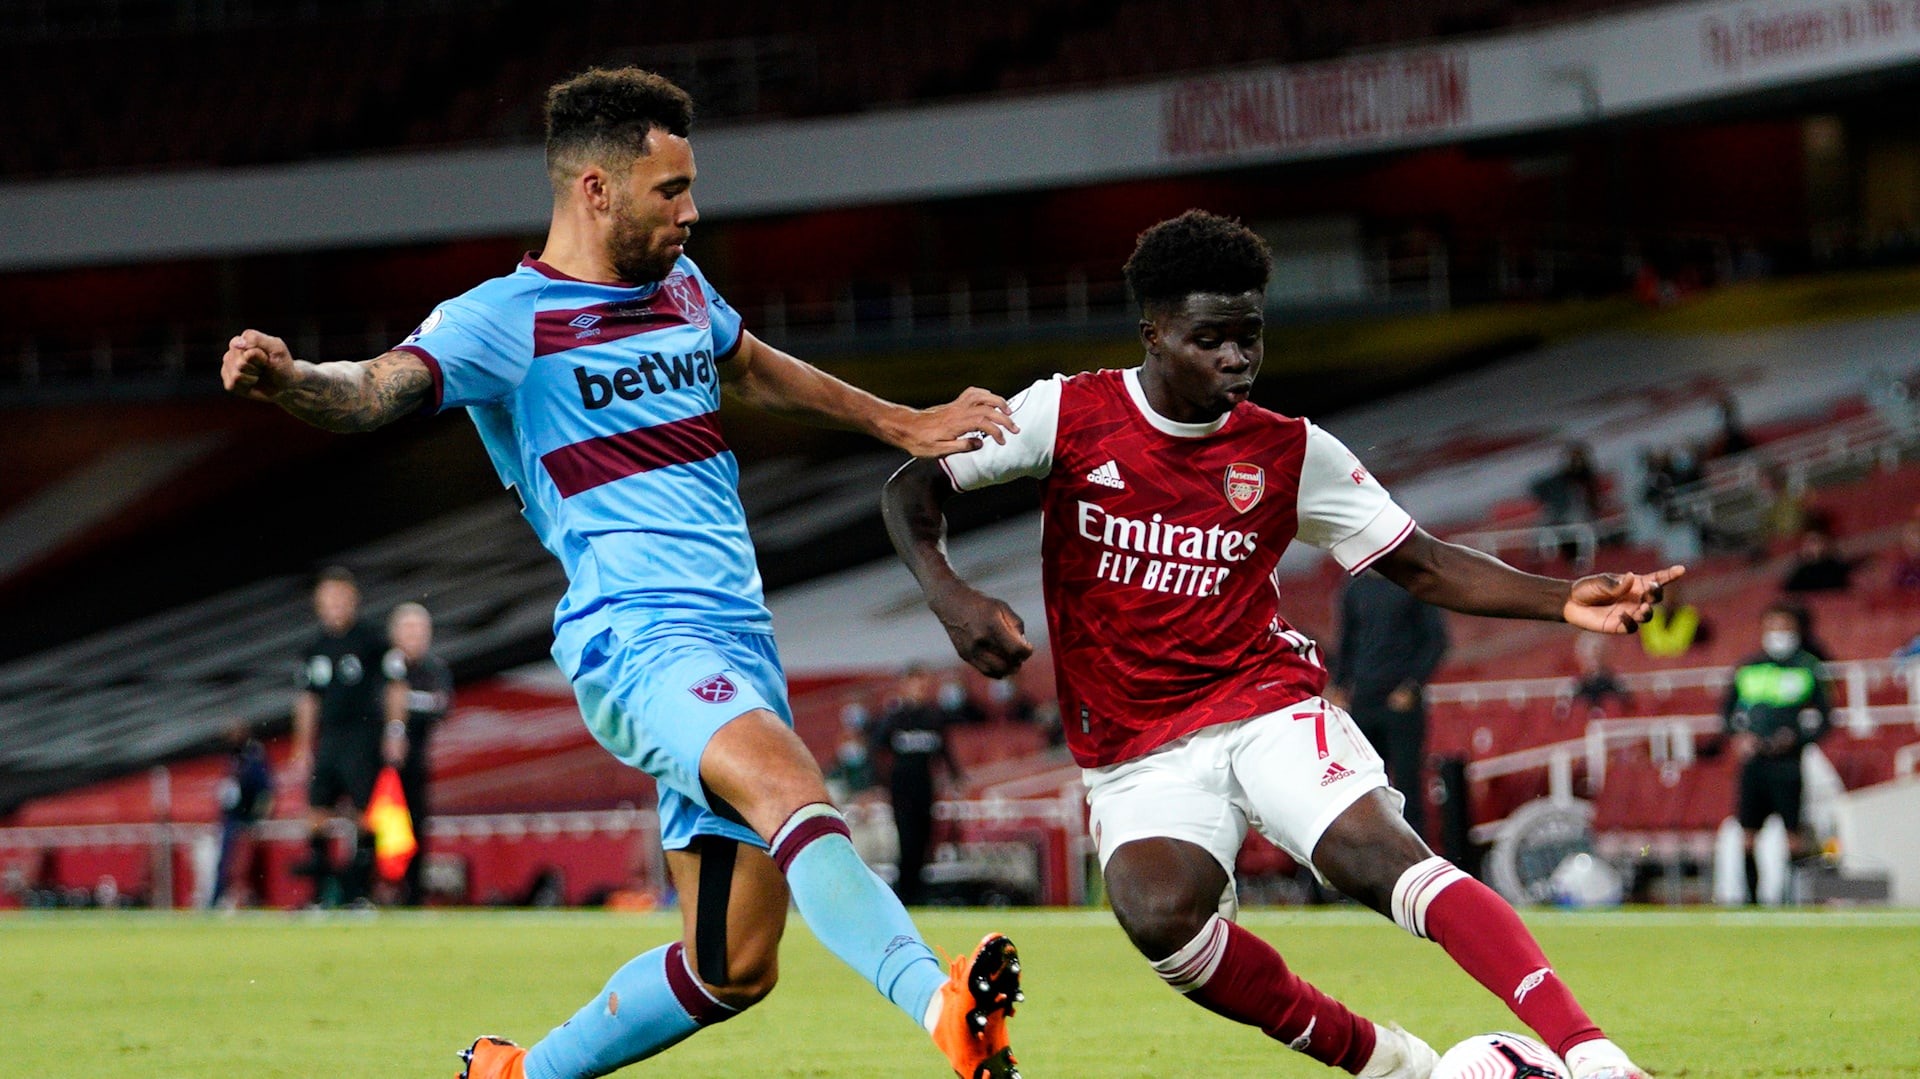 Watch West Ham vs Arsenal live, get Premier League 2020-21 telecast and streaming details for India